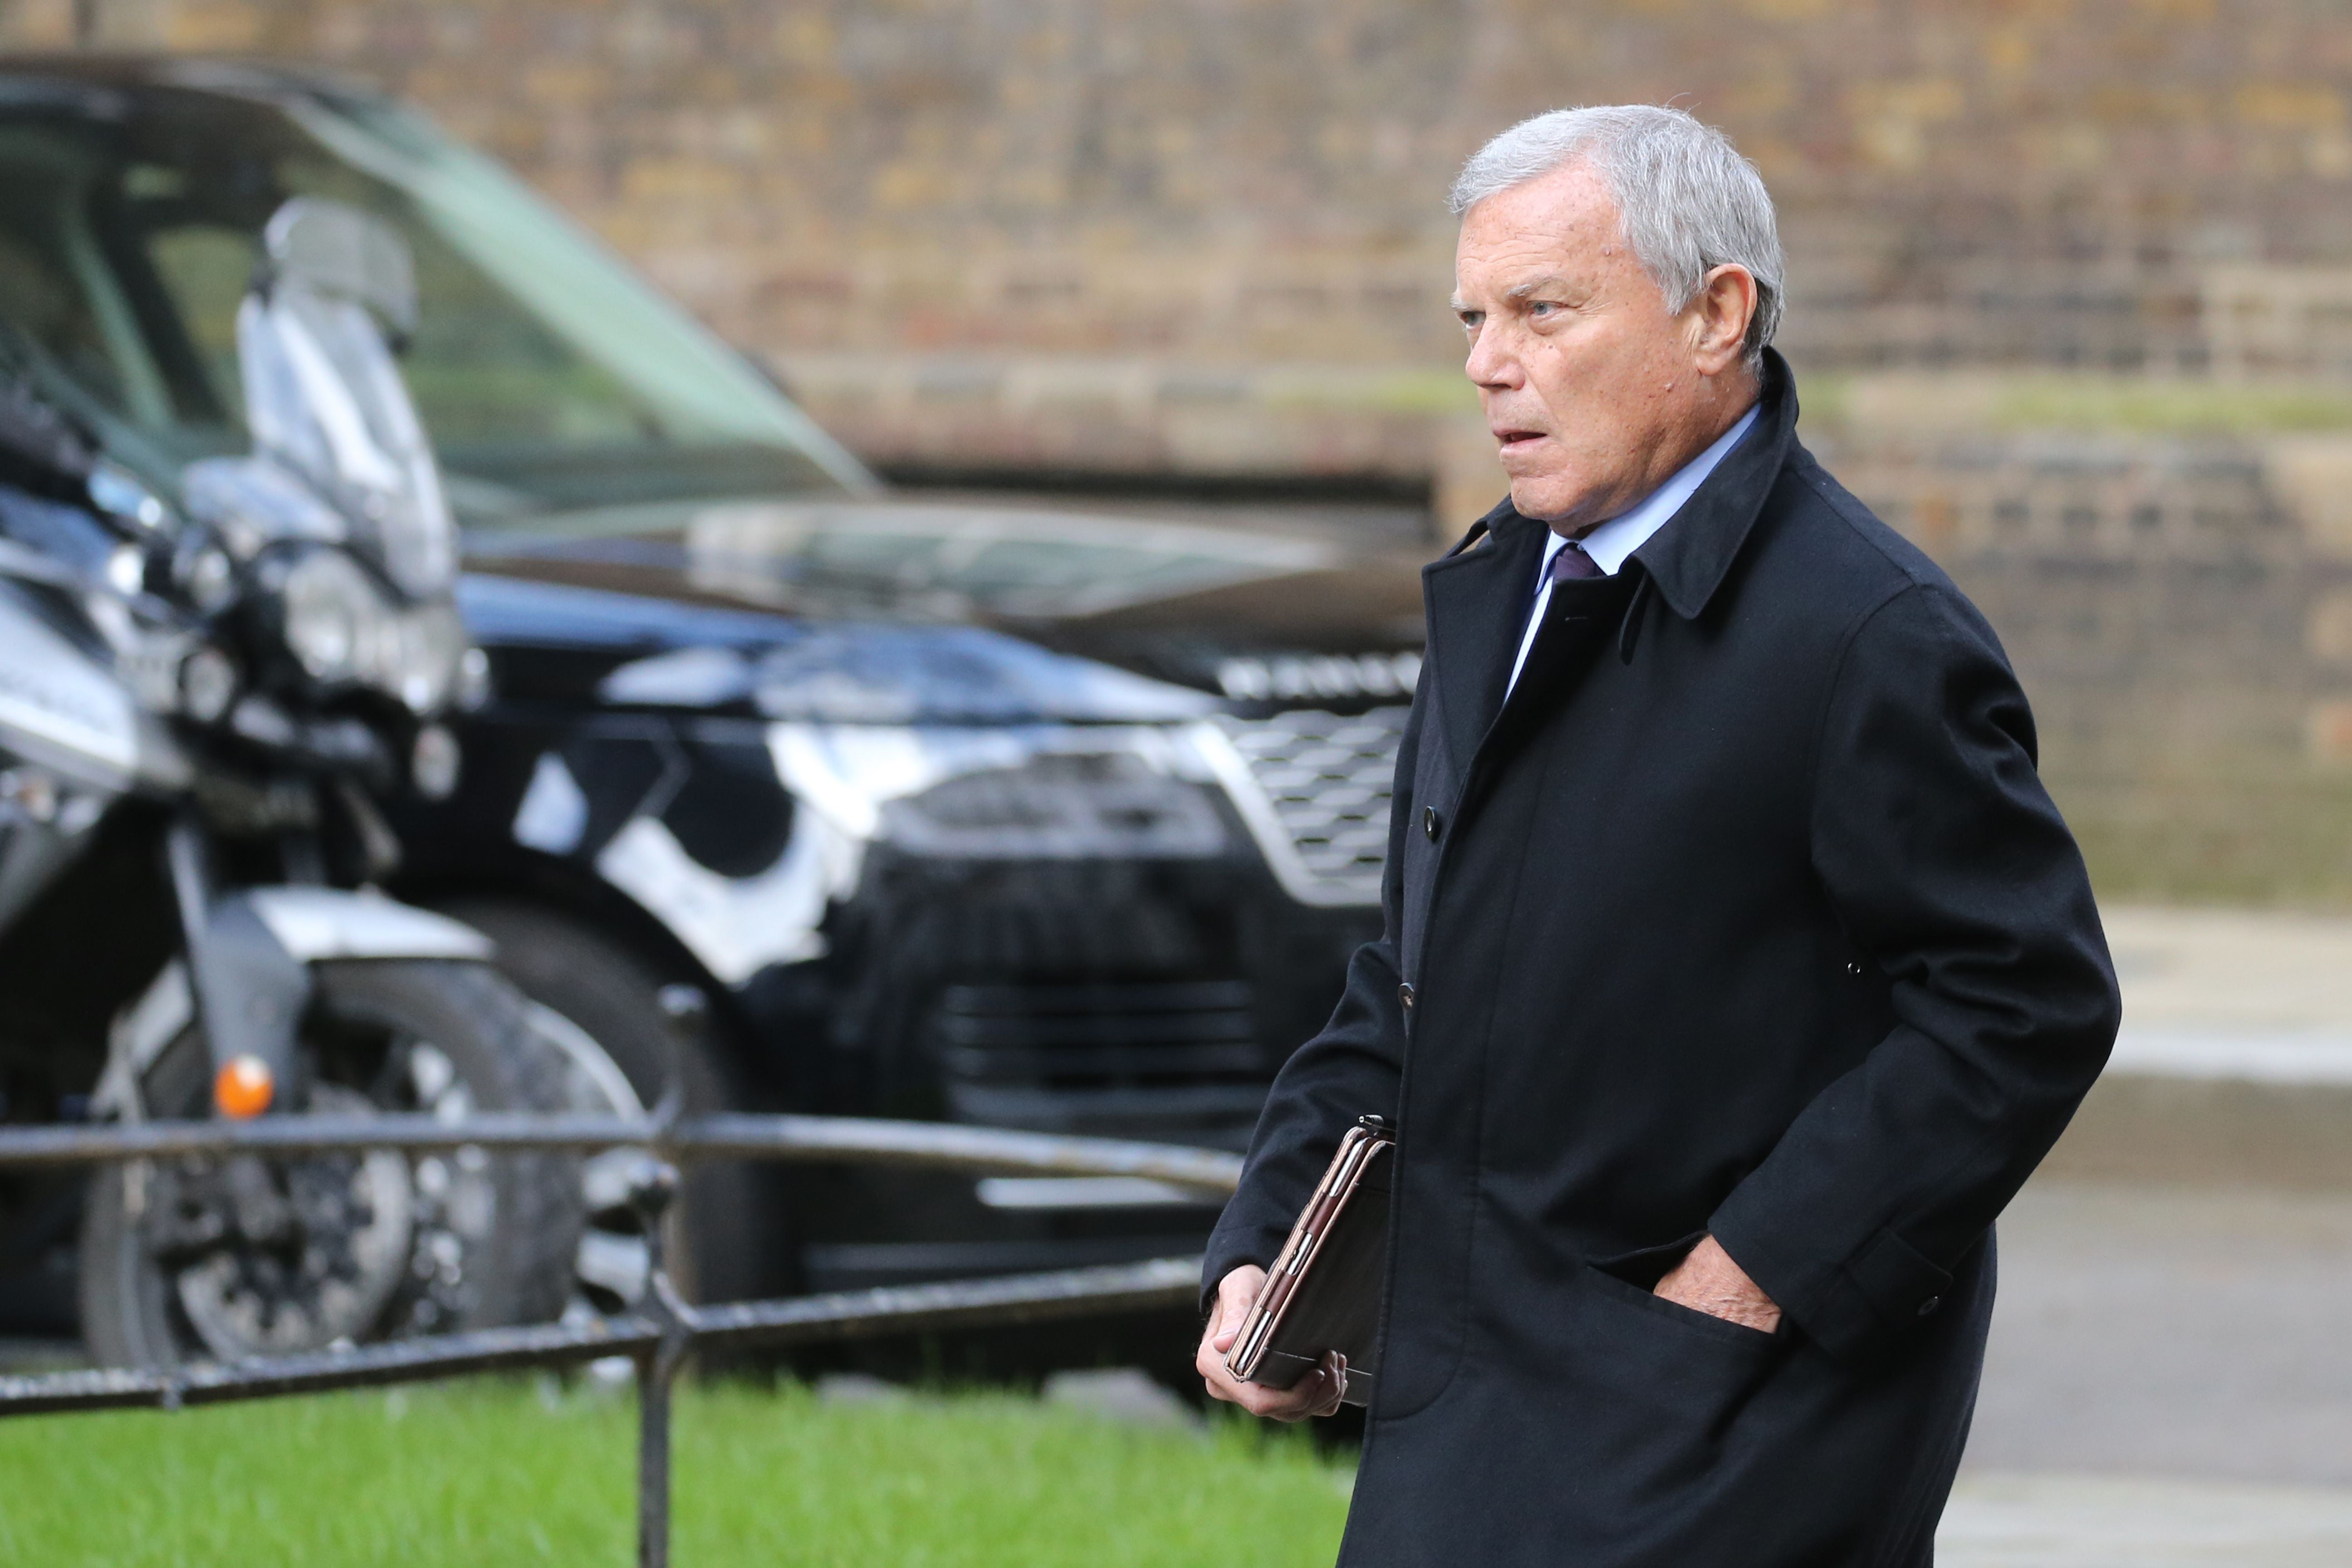 The WPP founder said his old firm’s decision to withhold payments from him was ‘petty’